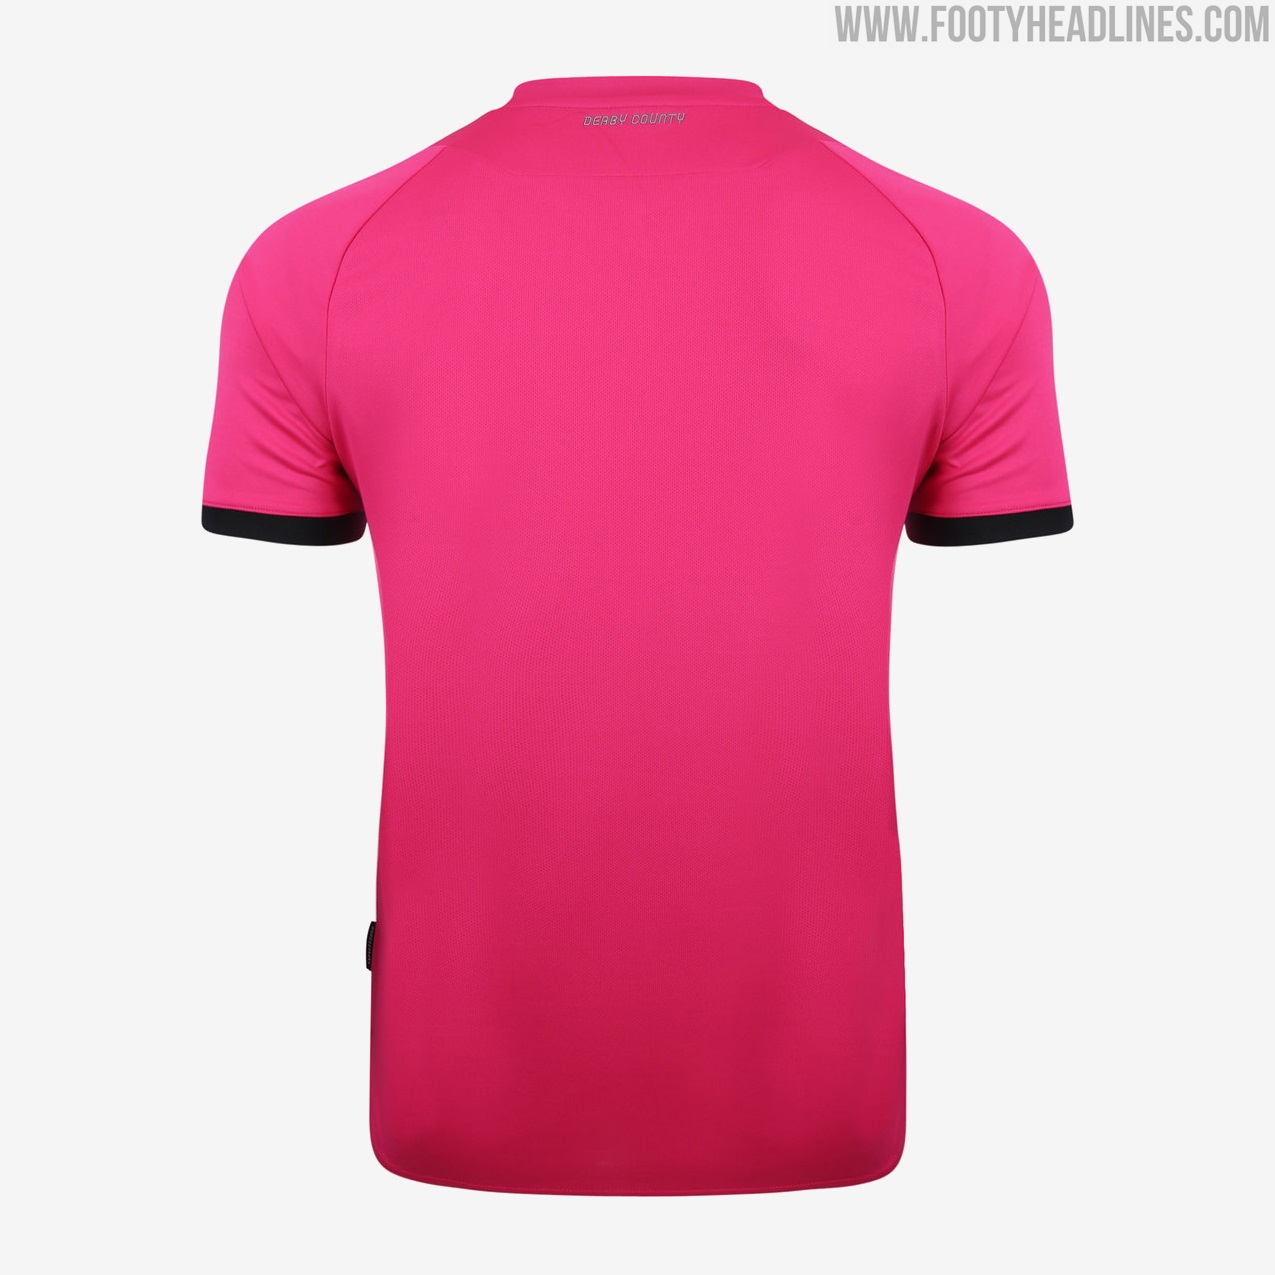 Derby County 20-21 Third Kit Released - Footy Headlines